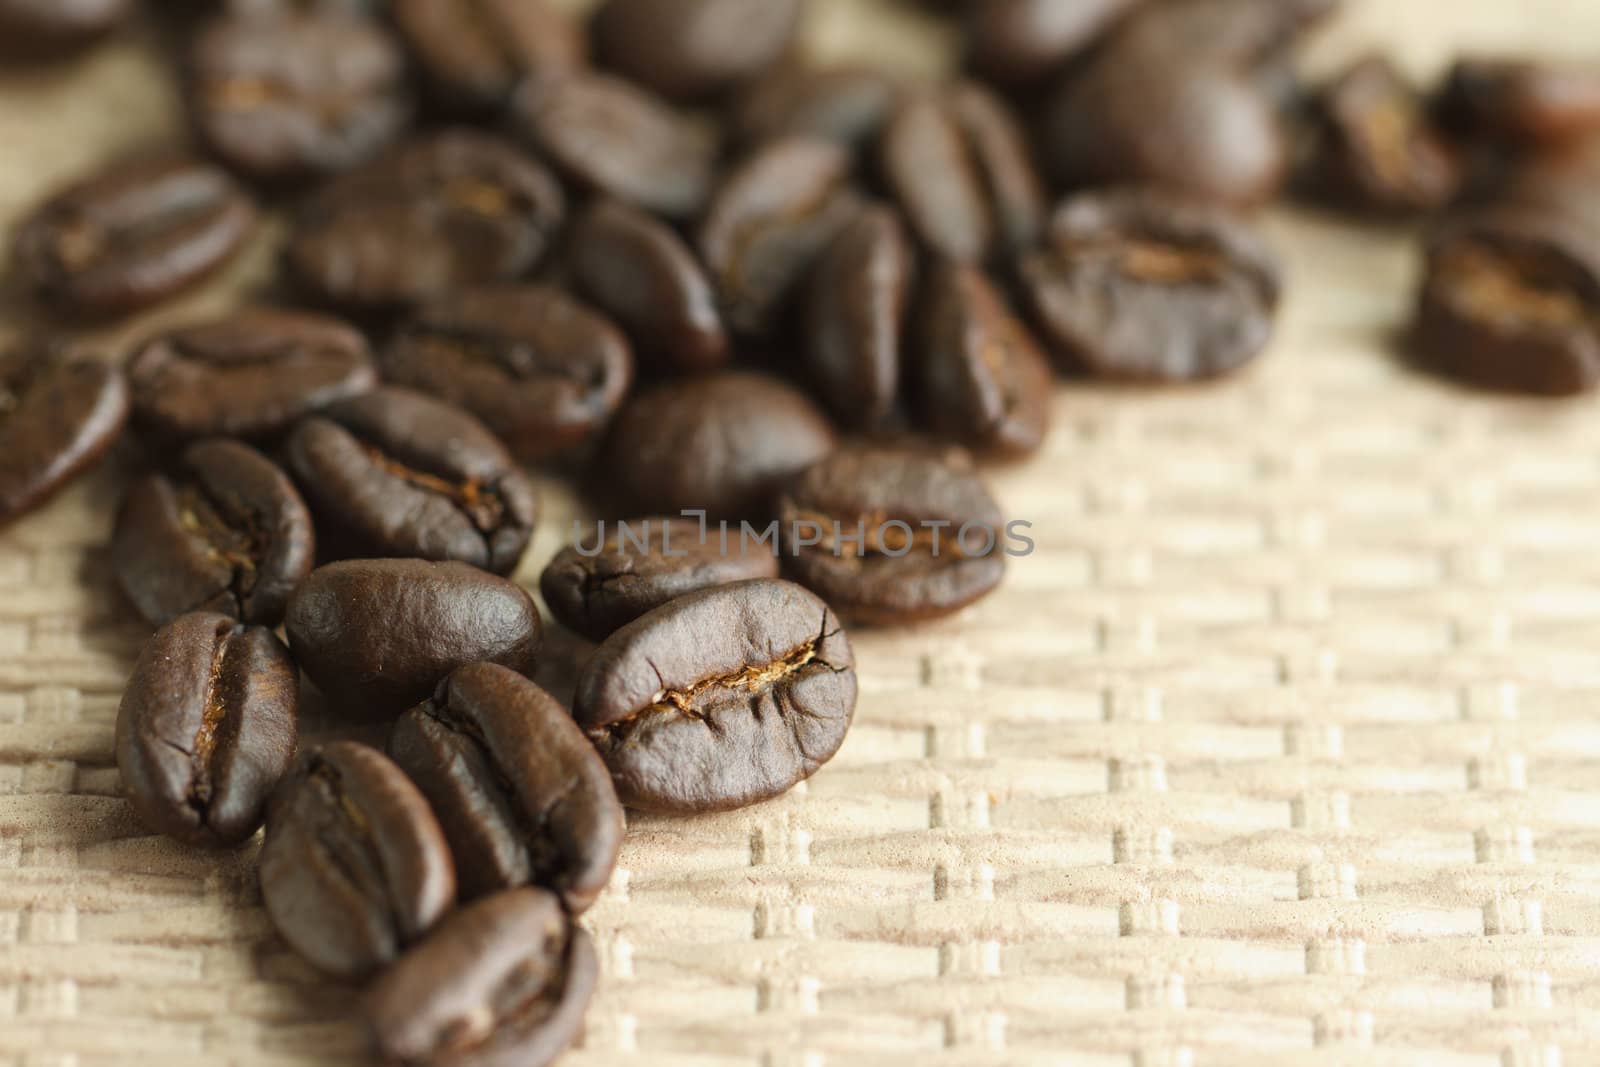 Coffee Beans by buchachon